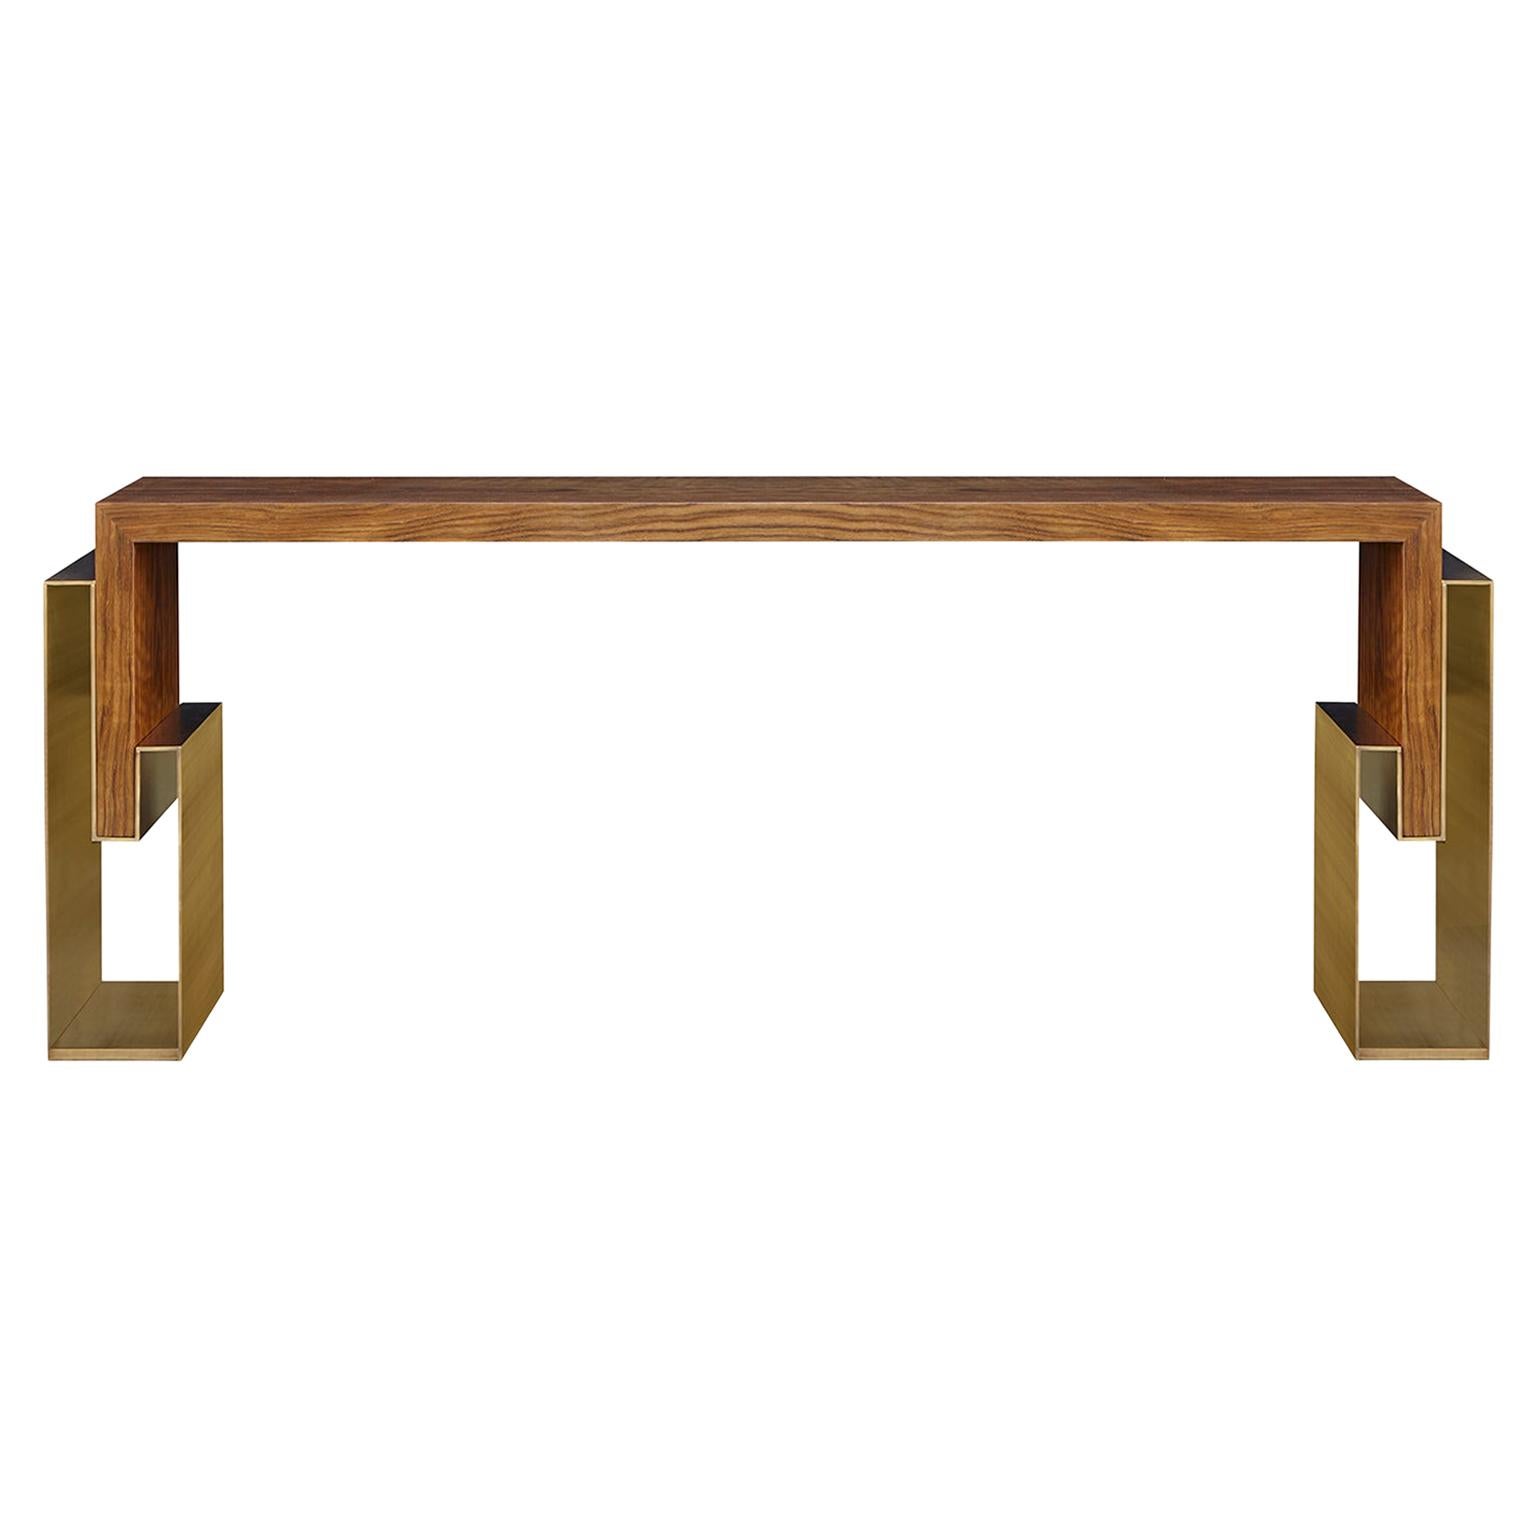 Contemporary Handcrafted Console "Alke" in Wood with Brass Pedestals by Anaktae For Sale